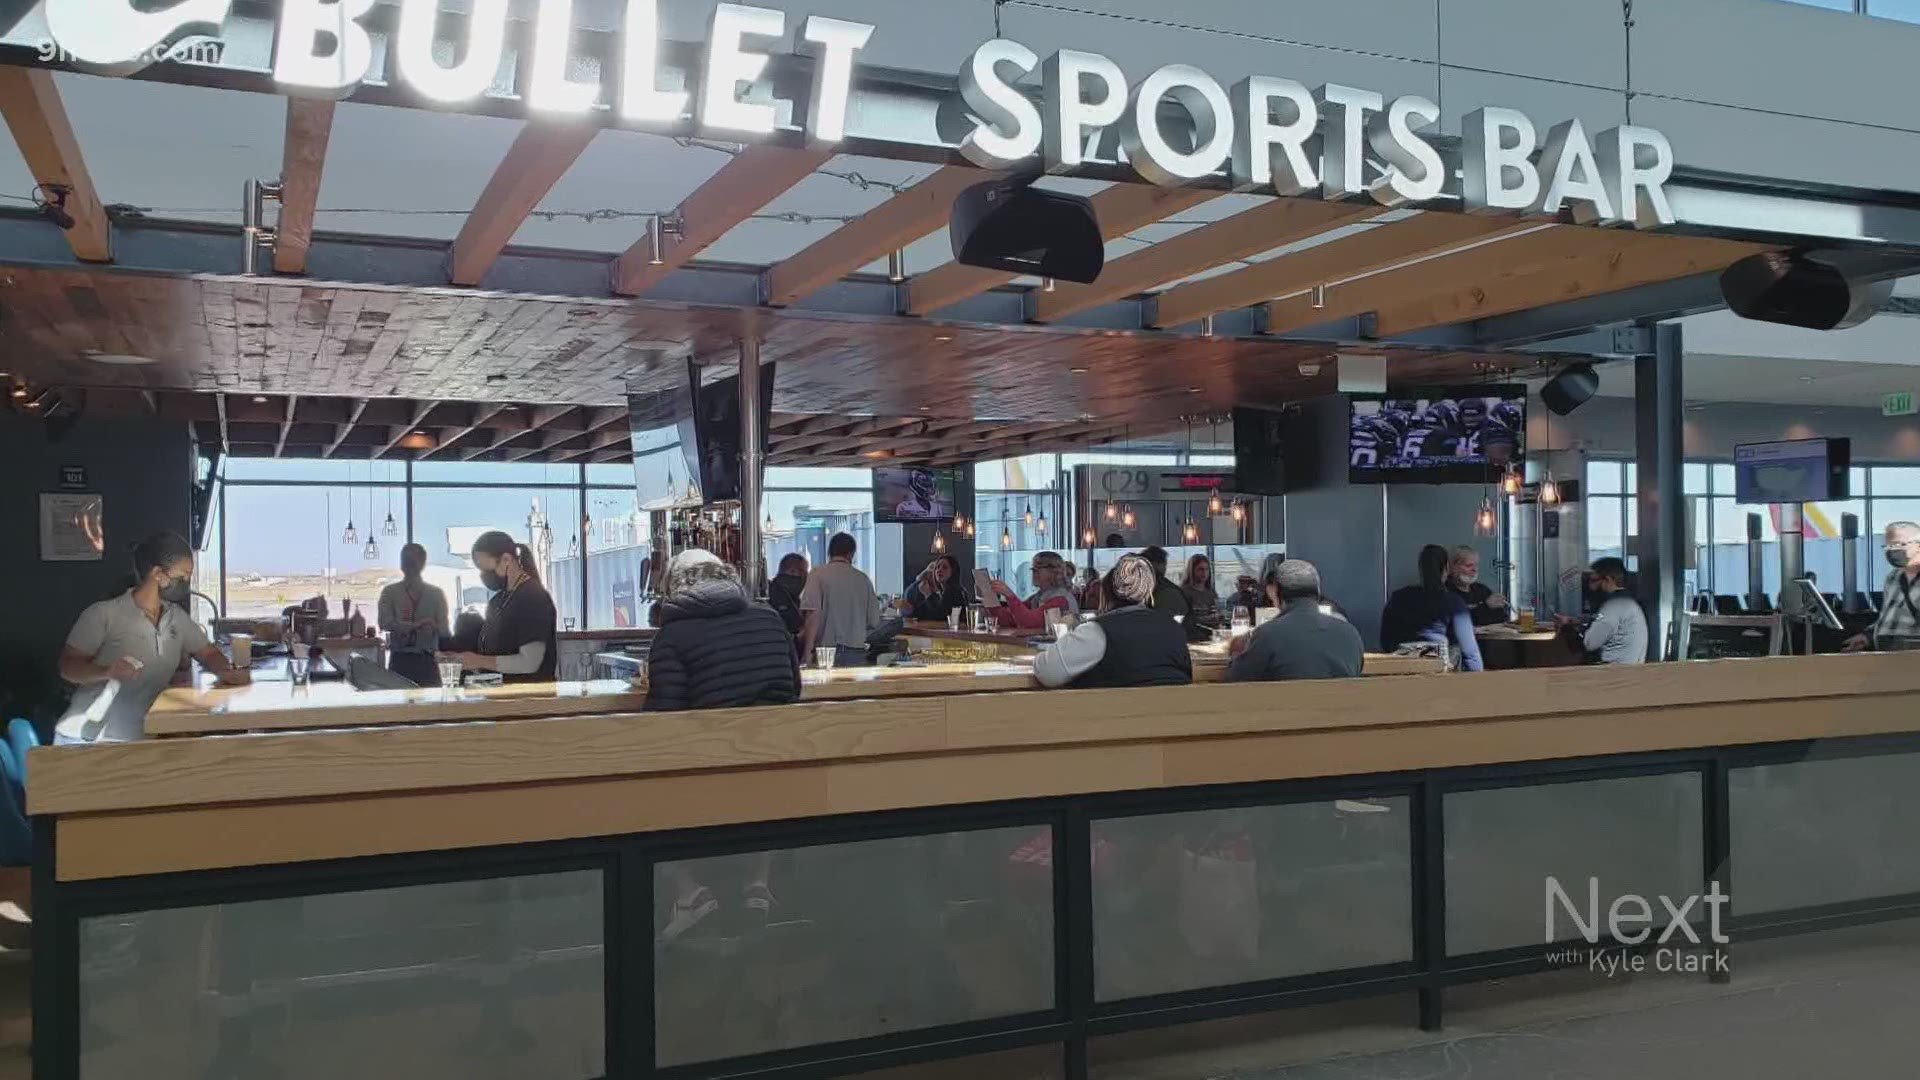 Denver's COVID restrictions recently increased, once again impacting bars and restaurants. Some viewers wanted clarification on the airport's rules.